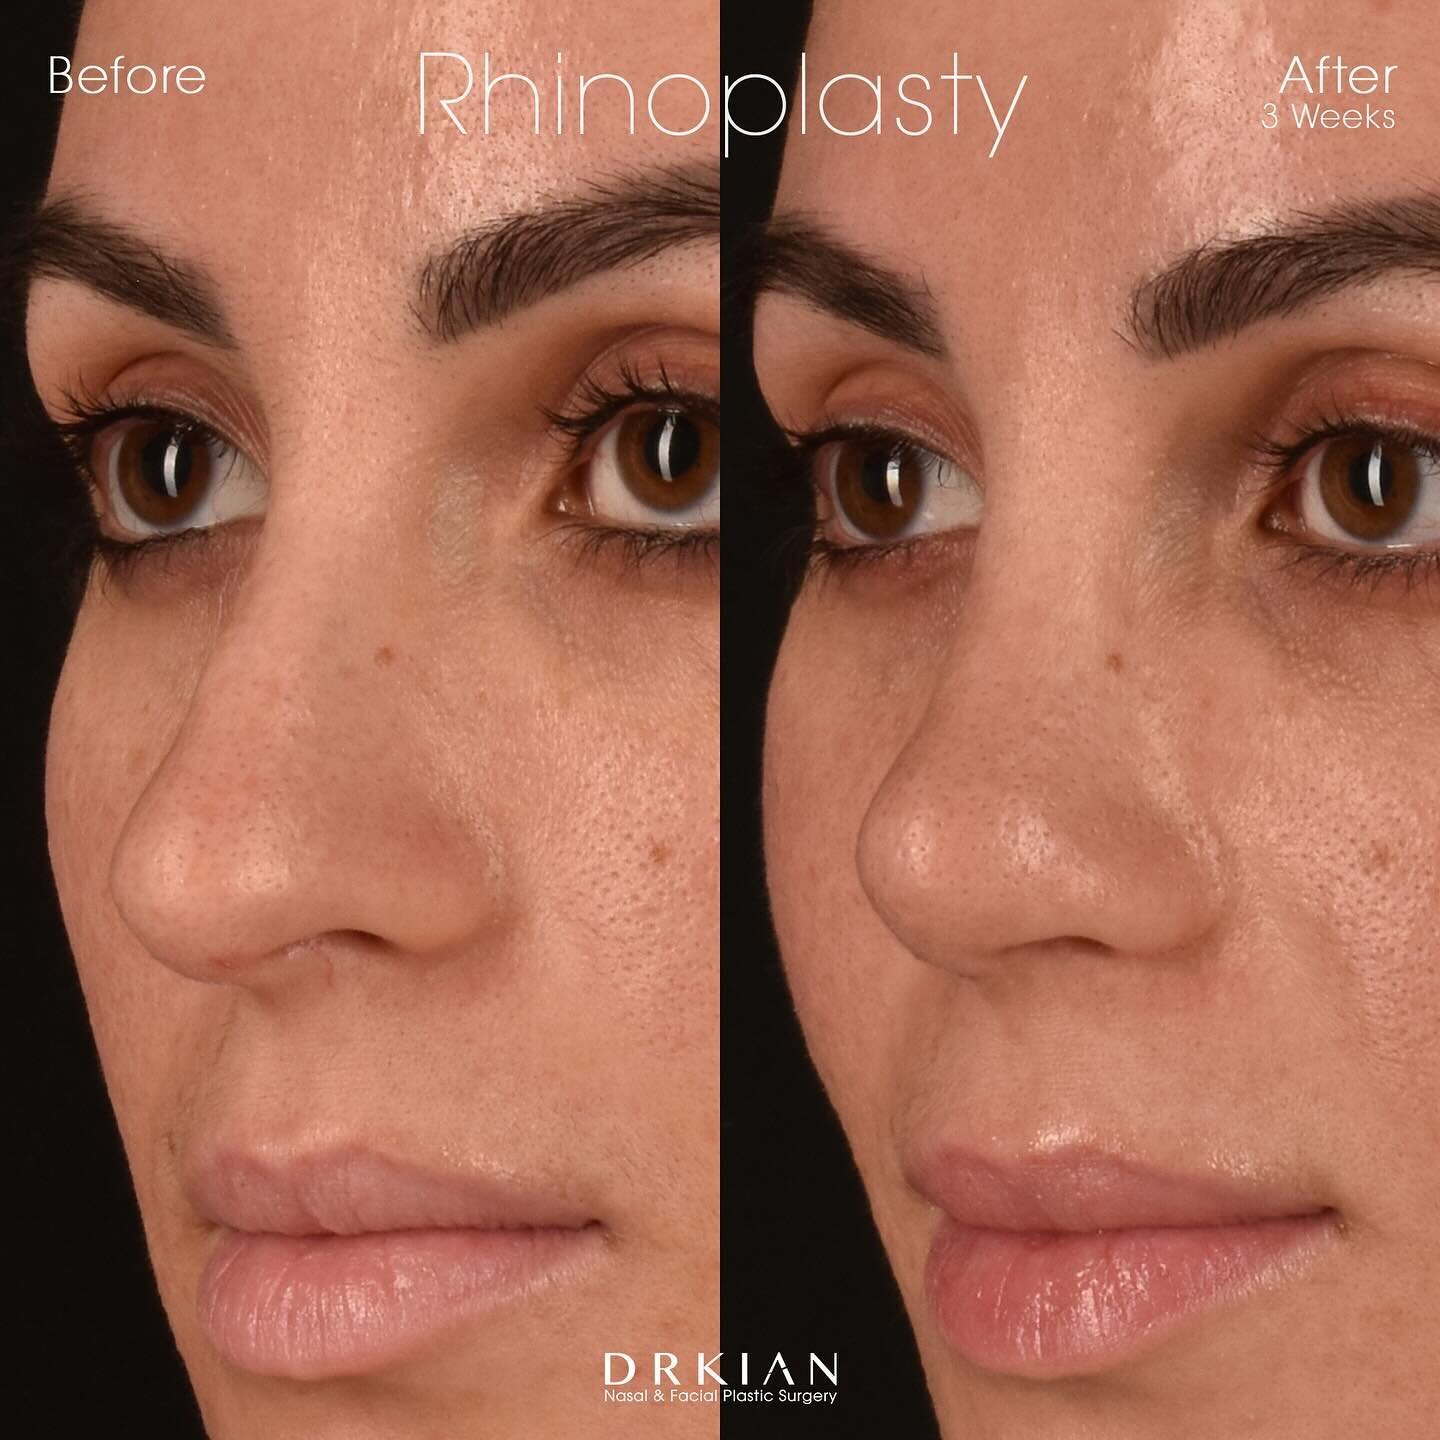 𝐏𝐫𝐨𝐜𝐞𝐝𝐮𝐫𝐞: Open Cosmetic Rhinoplasty
𝐑𝐞𝐬𝐮𝐥𝐭𝐬: Before &amp; After Three Weeks
𝐒𝐮𝐫𝐠𝐞𝐨𝐧&rsquo;𝐬 𝐍𝐨𝐭𝐞: This is an early preview of the final outcome. As swelling subsides over time, true results will become visible.

Choosing 